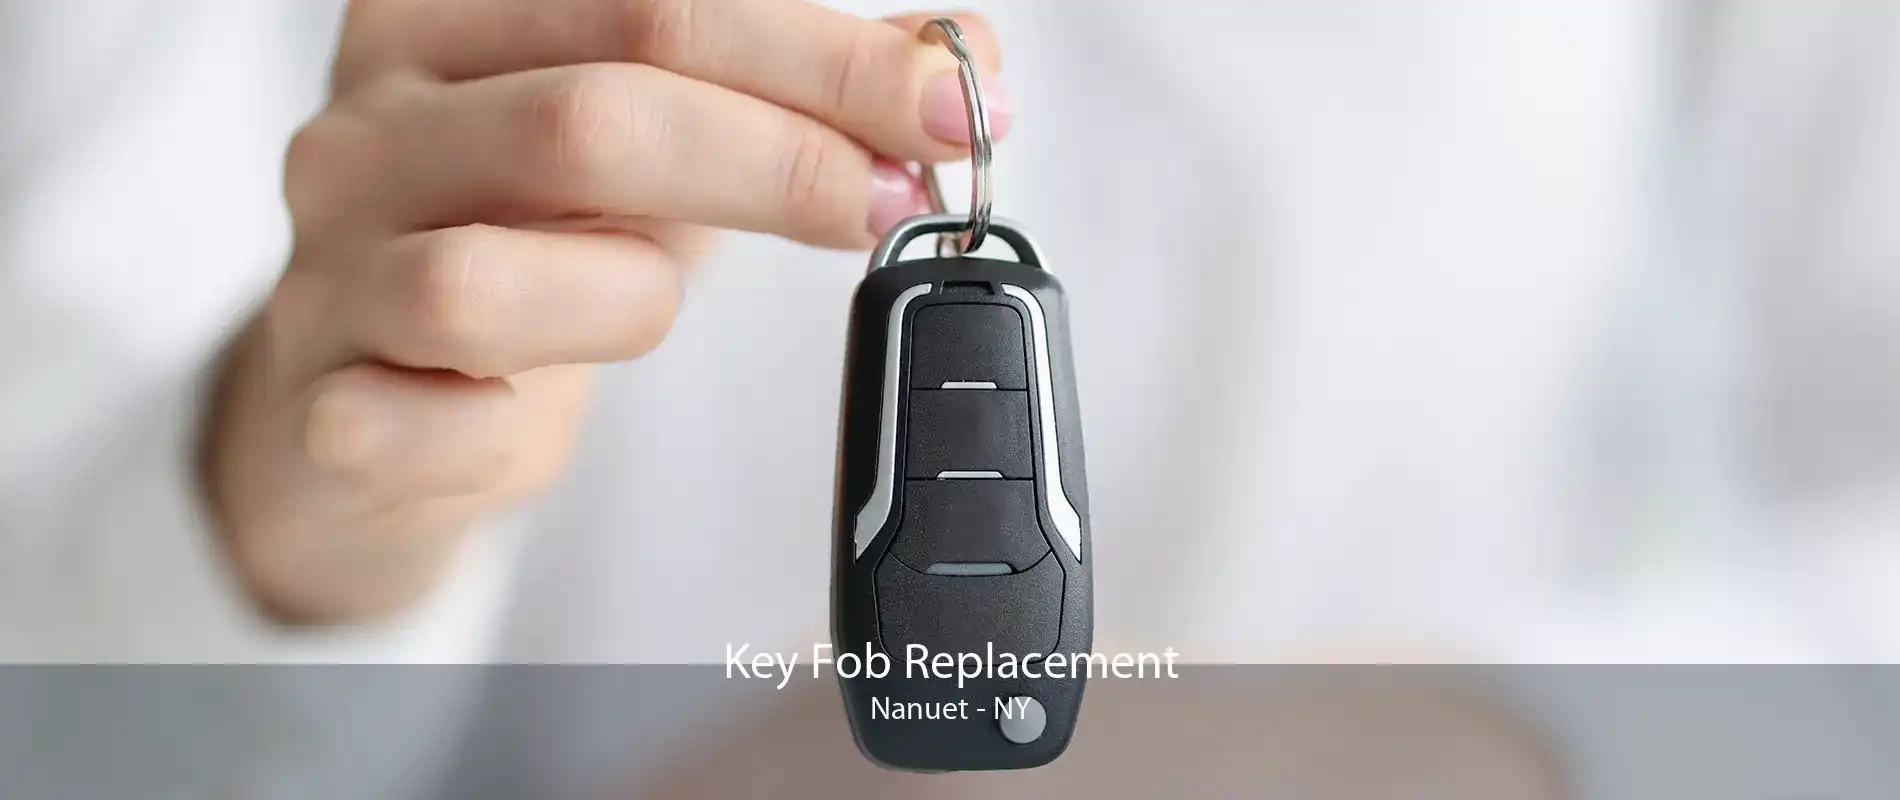 Key Fob Replacement Nanuet - NY